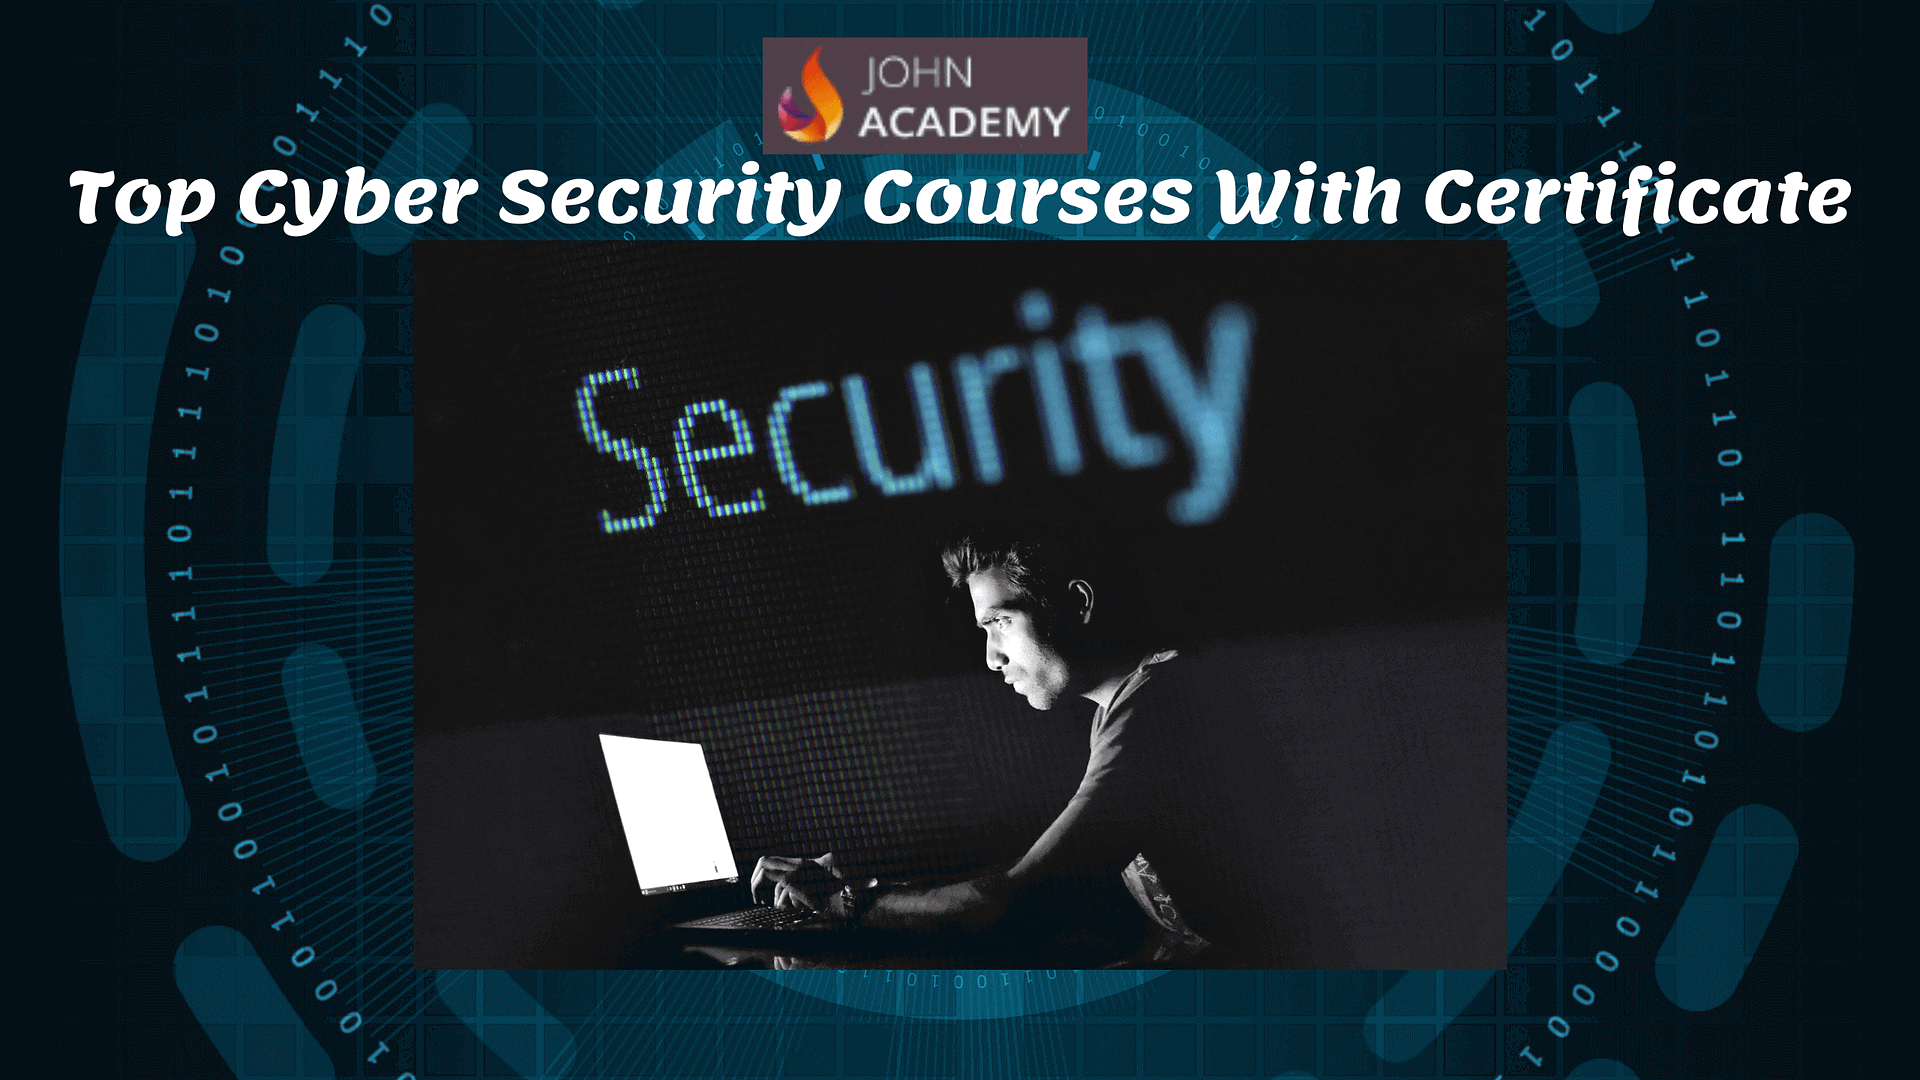 Top 24 Cyber Security Courses With Certificate [Johnacademy 2021]